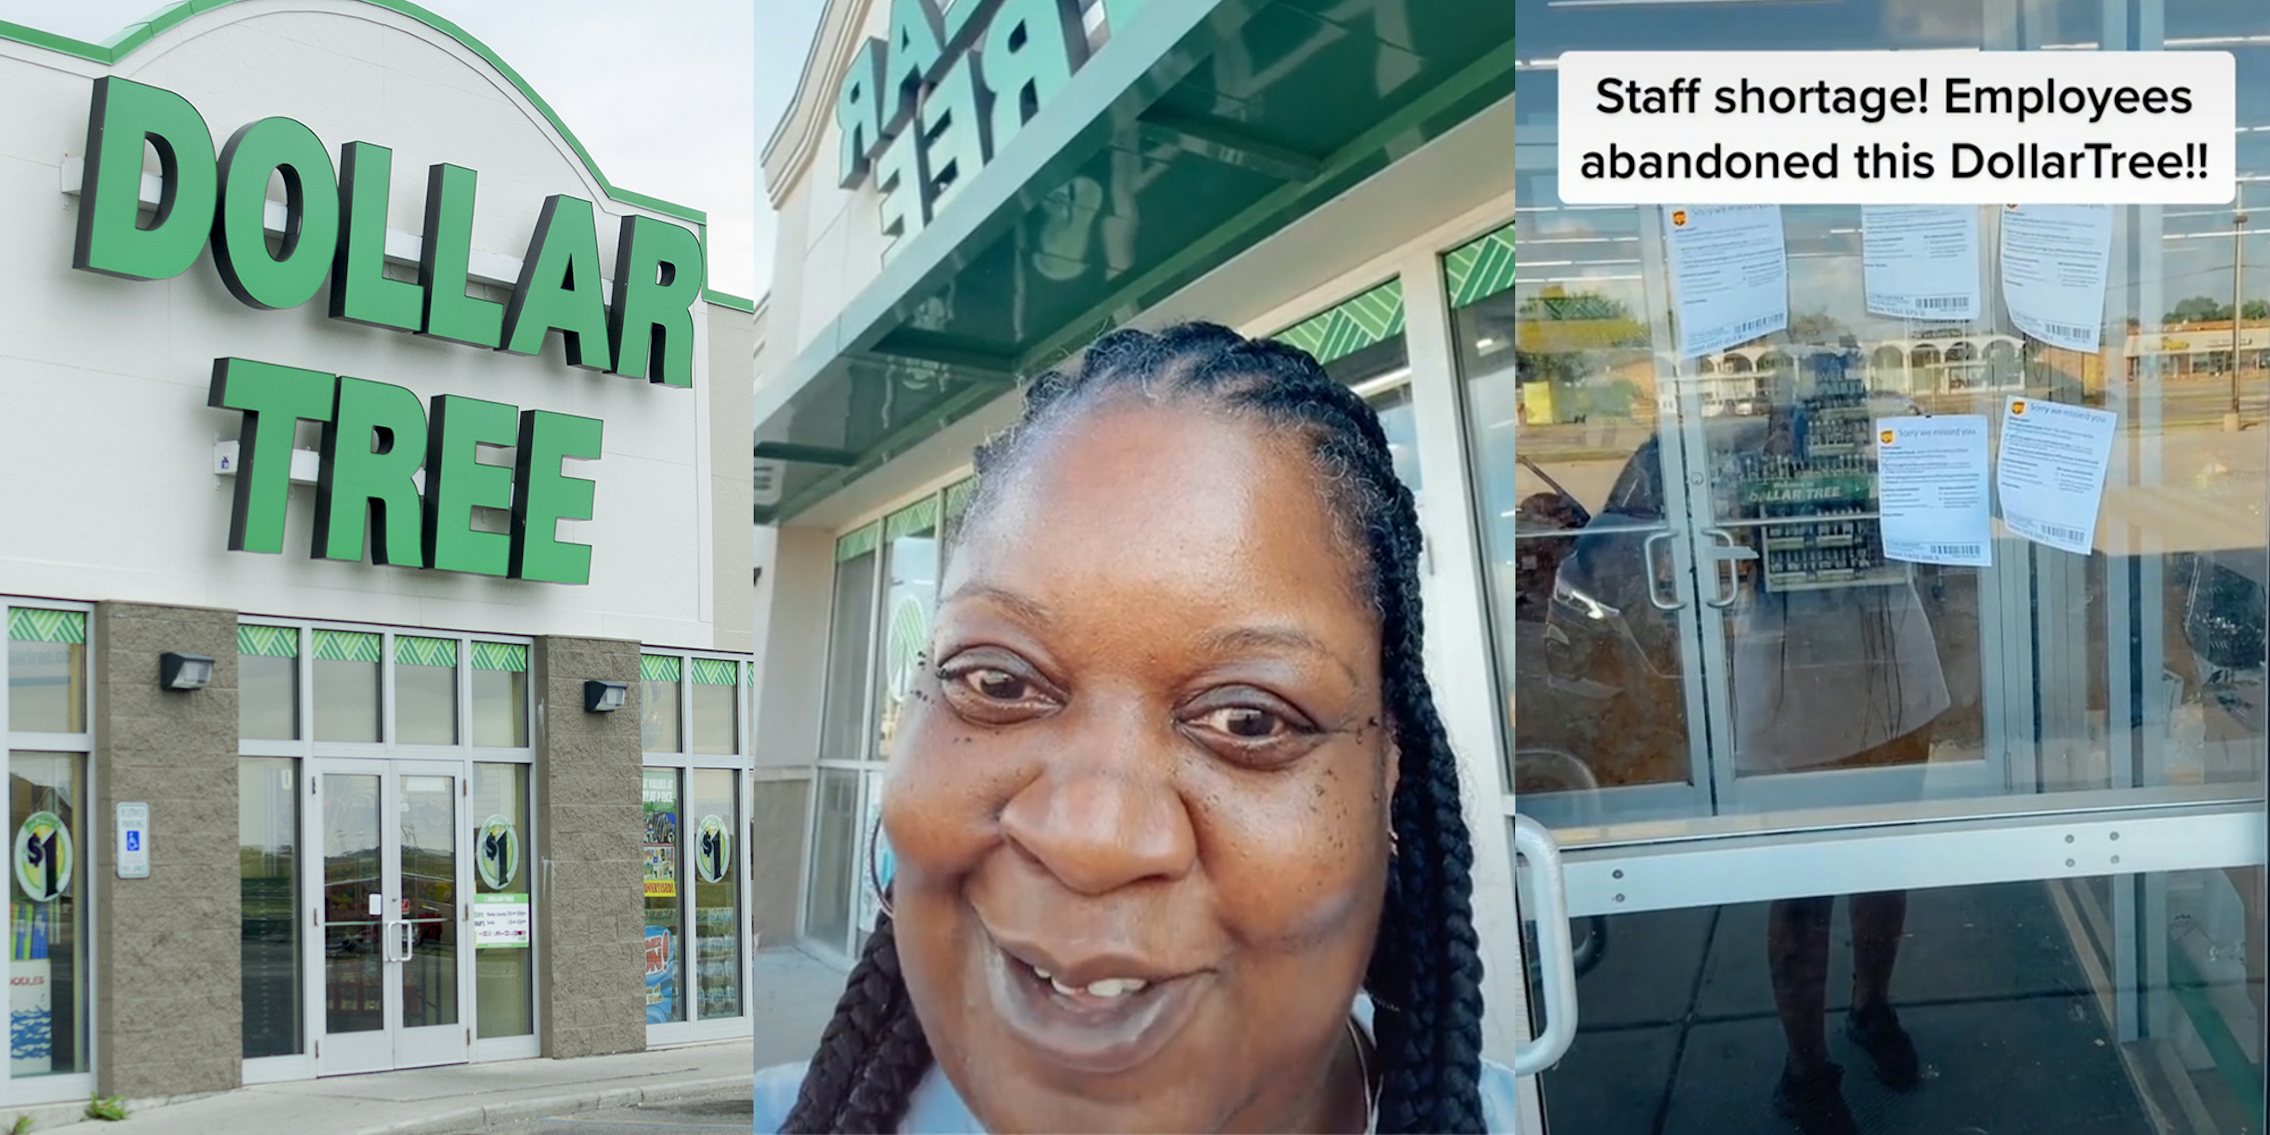 dollar tree store (l) woman in parking lot (c) door with notices and caption 'Staff shortage! Employees abandoned this DollarTree!!' (r)